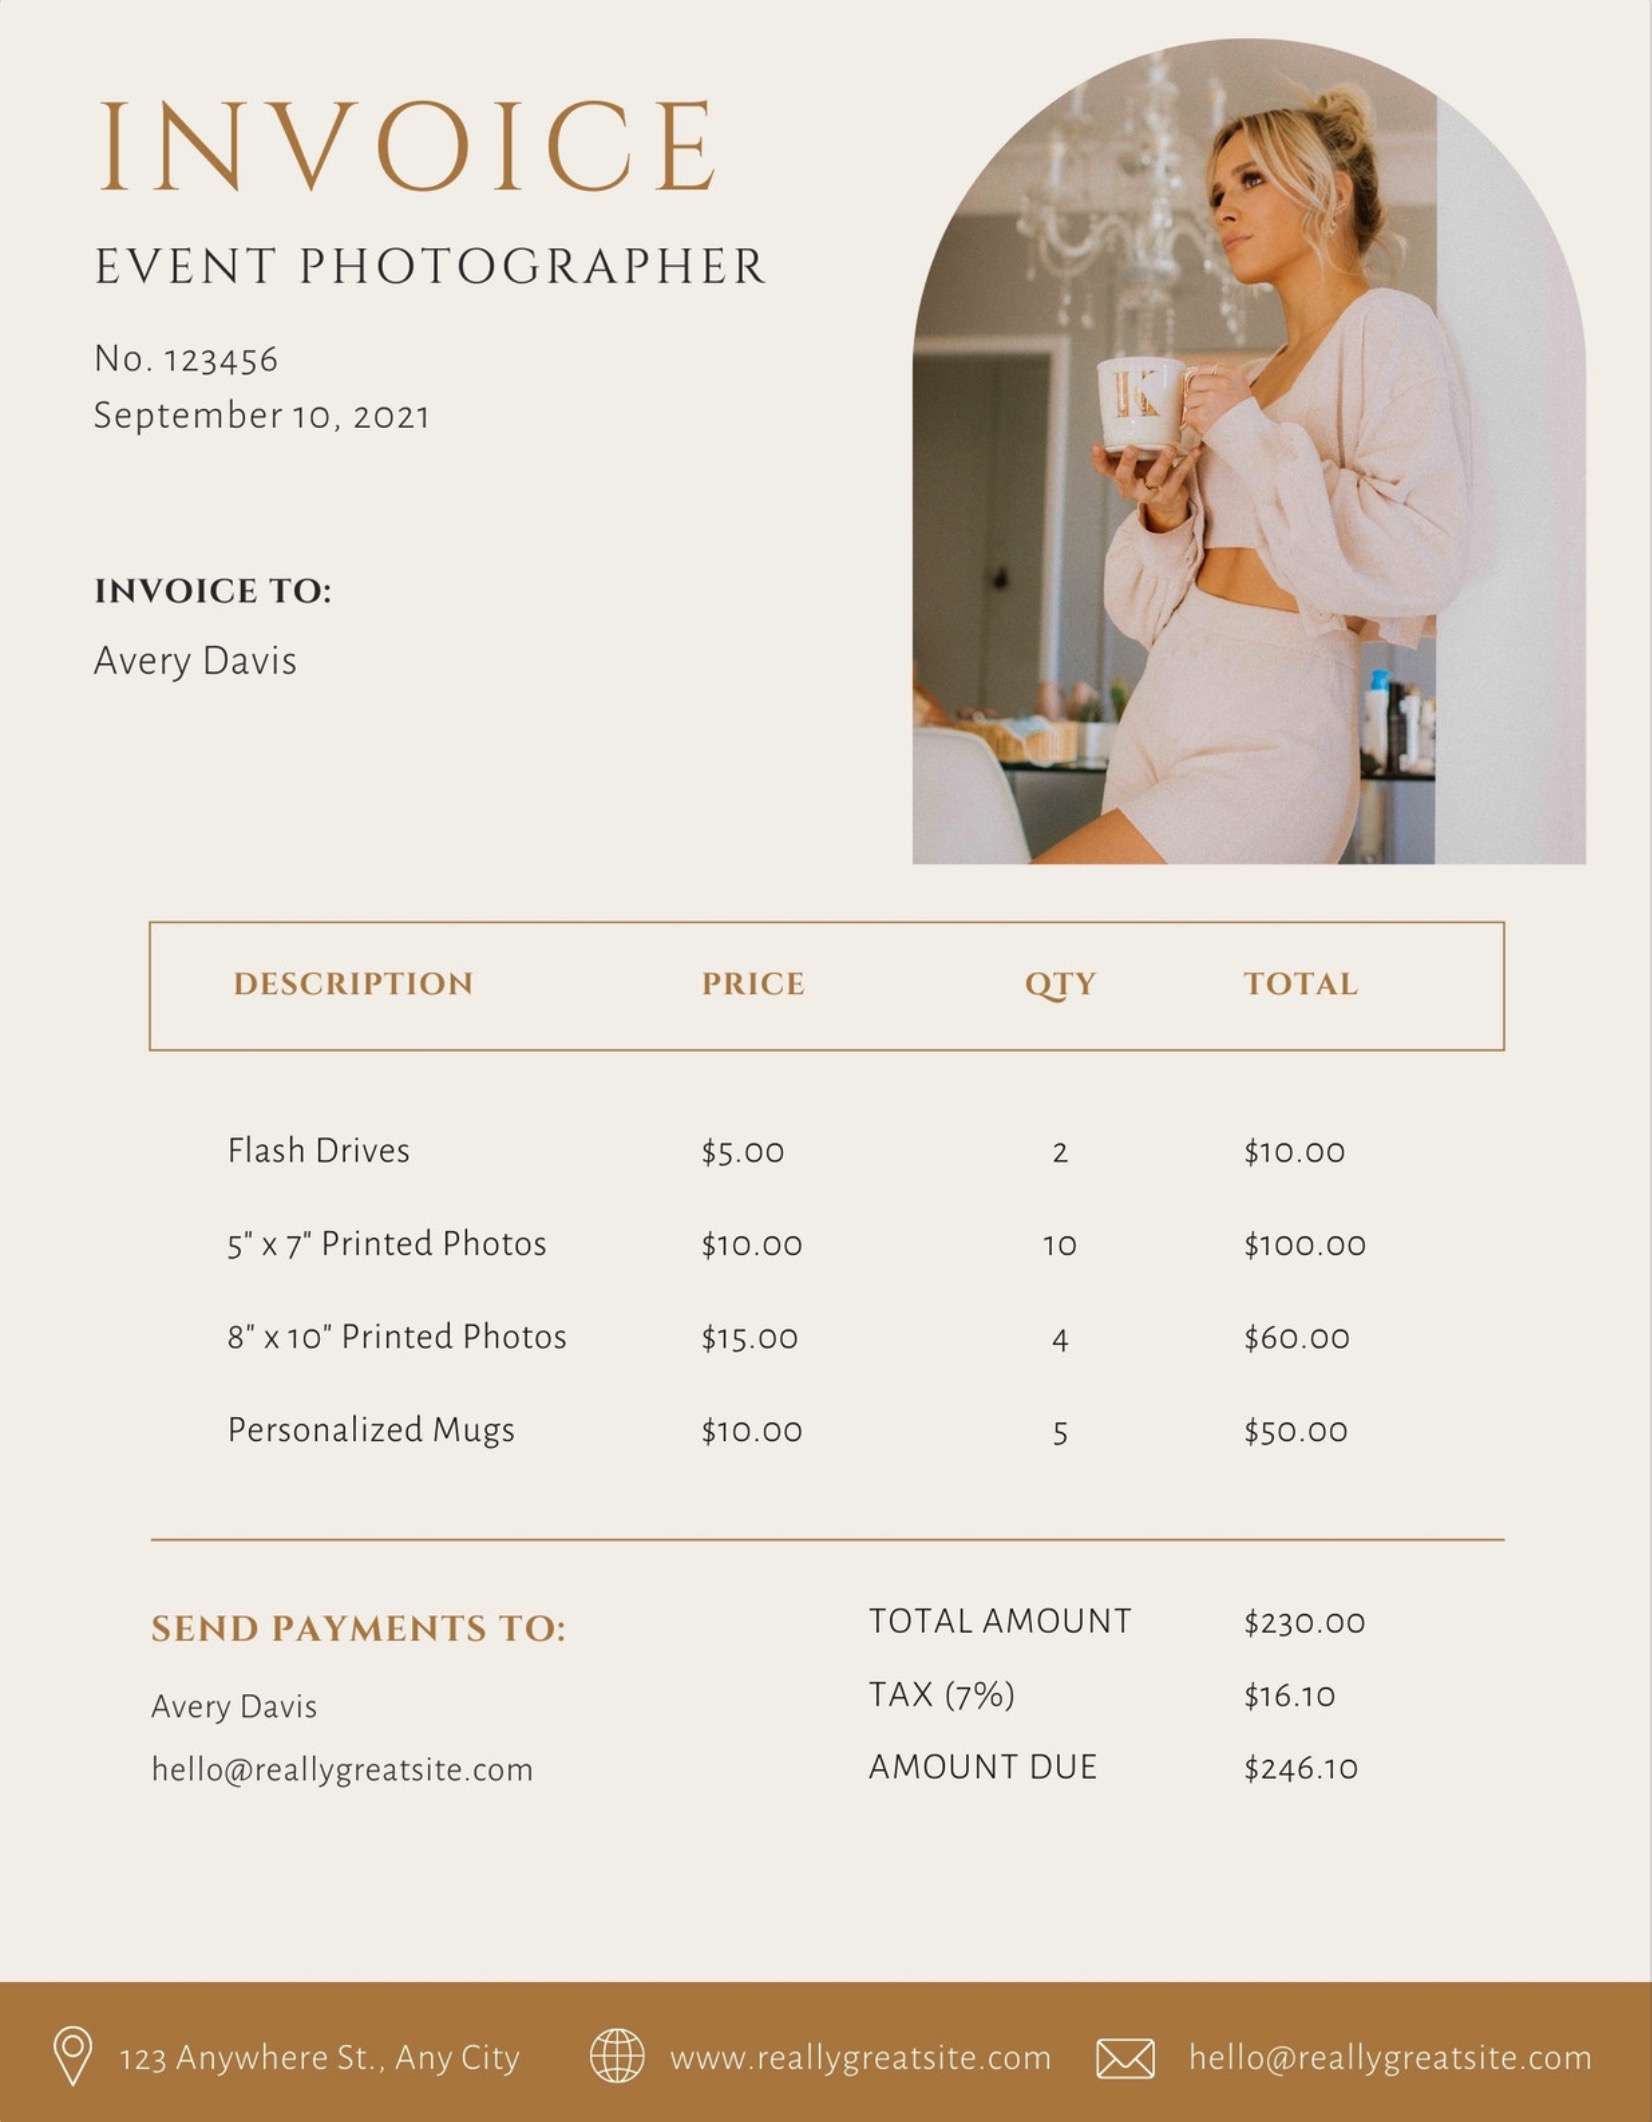 An invoice for an event photographer.